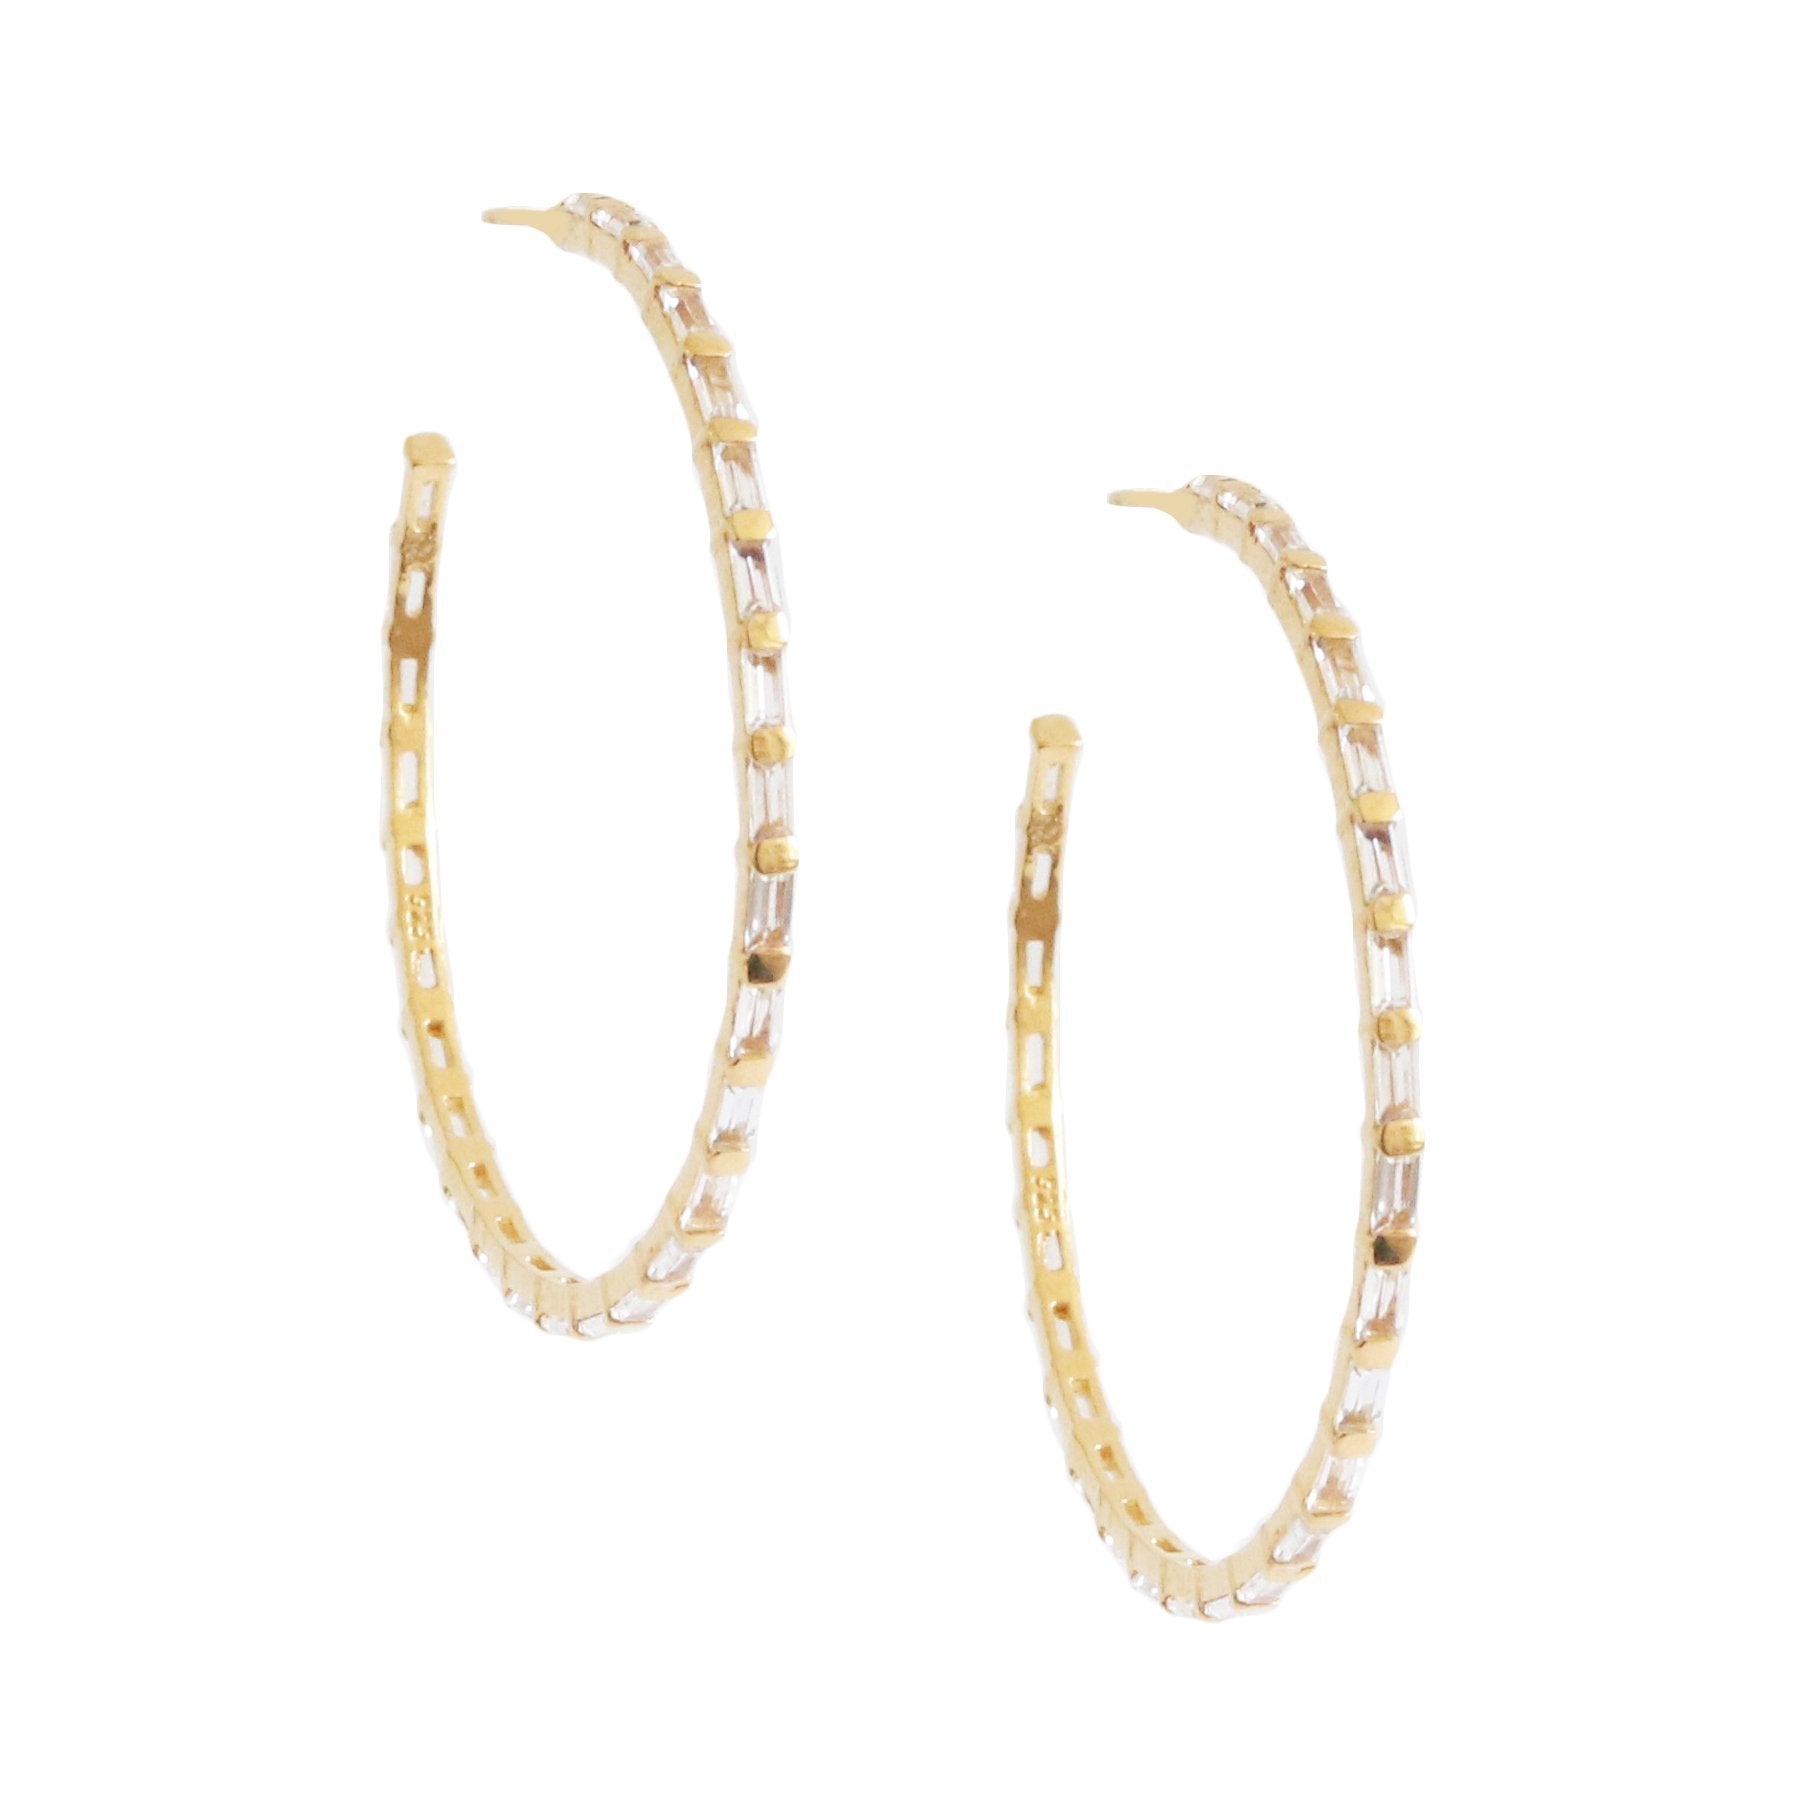 Loyal Studded Large Hoops - White Topaz & Gold - SO PRETTY CARA COTTER